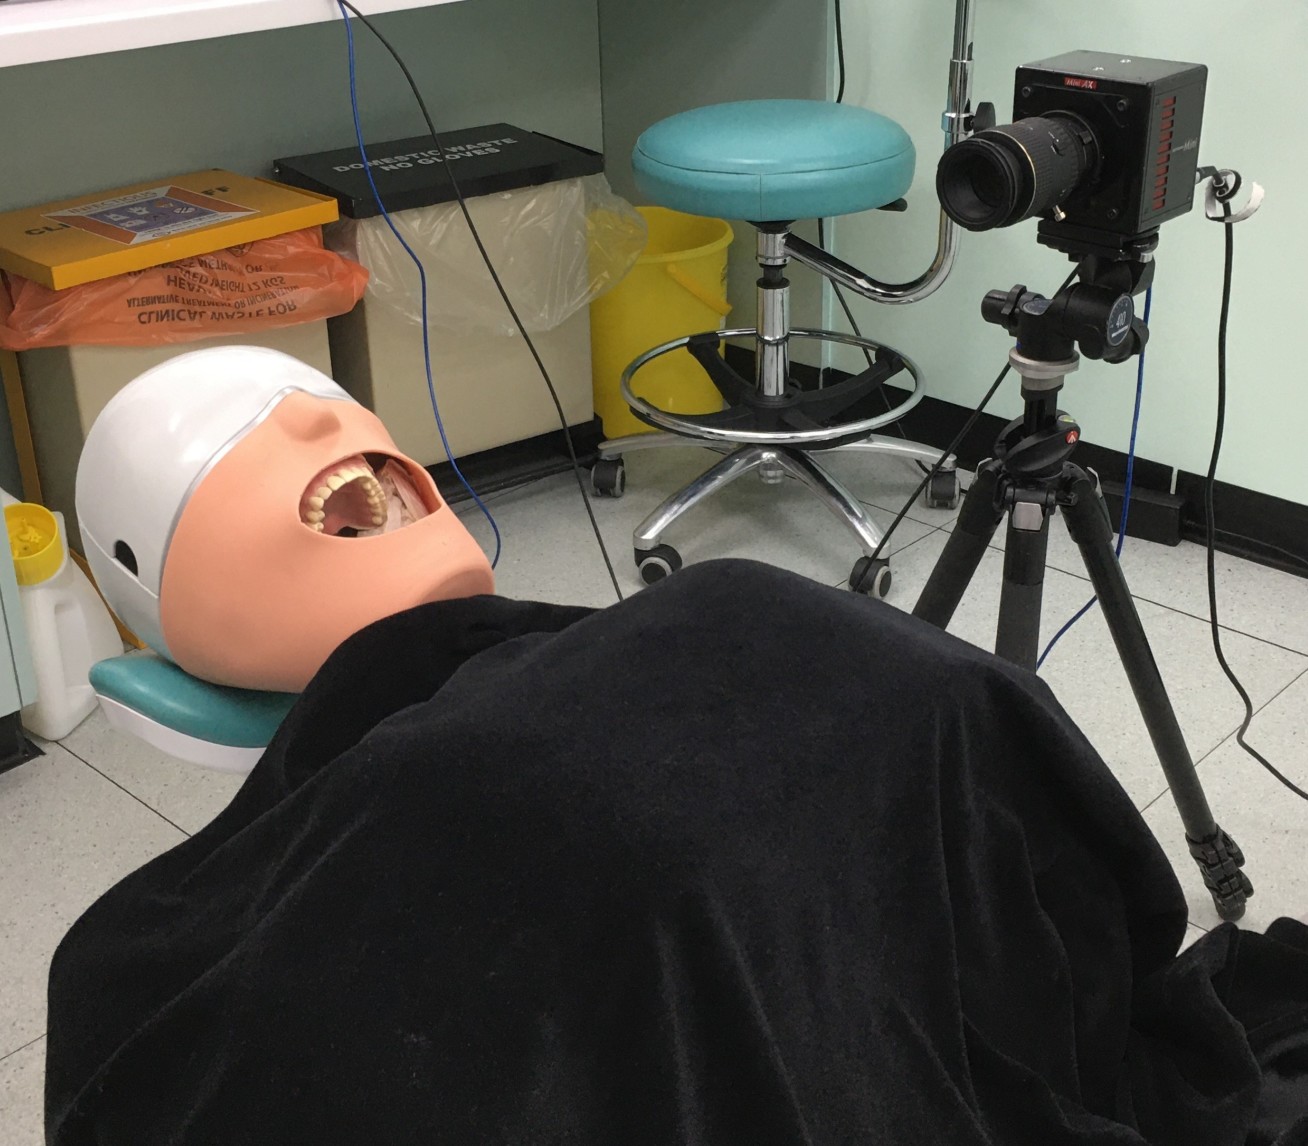 Photo of a mannequin with teeth used in the tests. The camera can be seen pointing at the dummy.